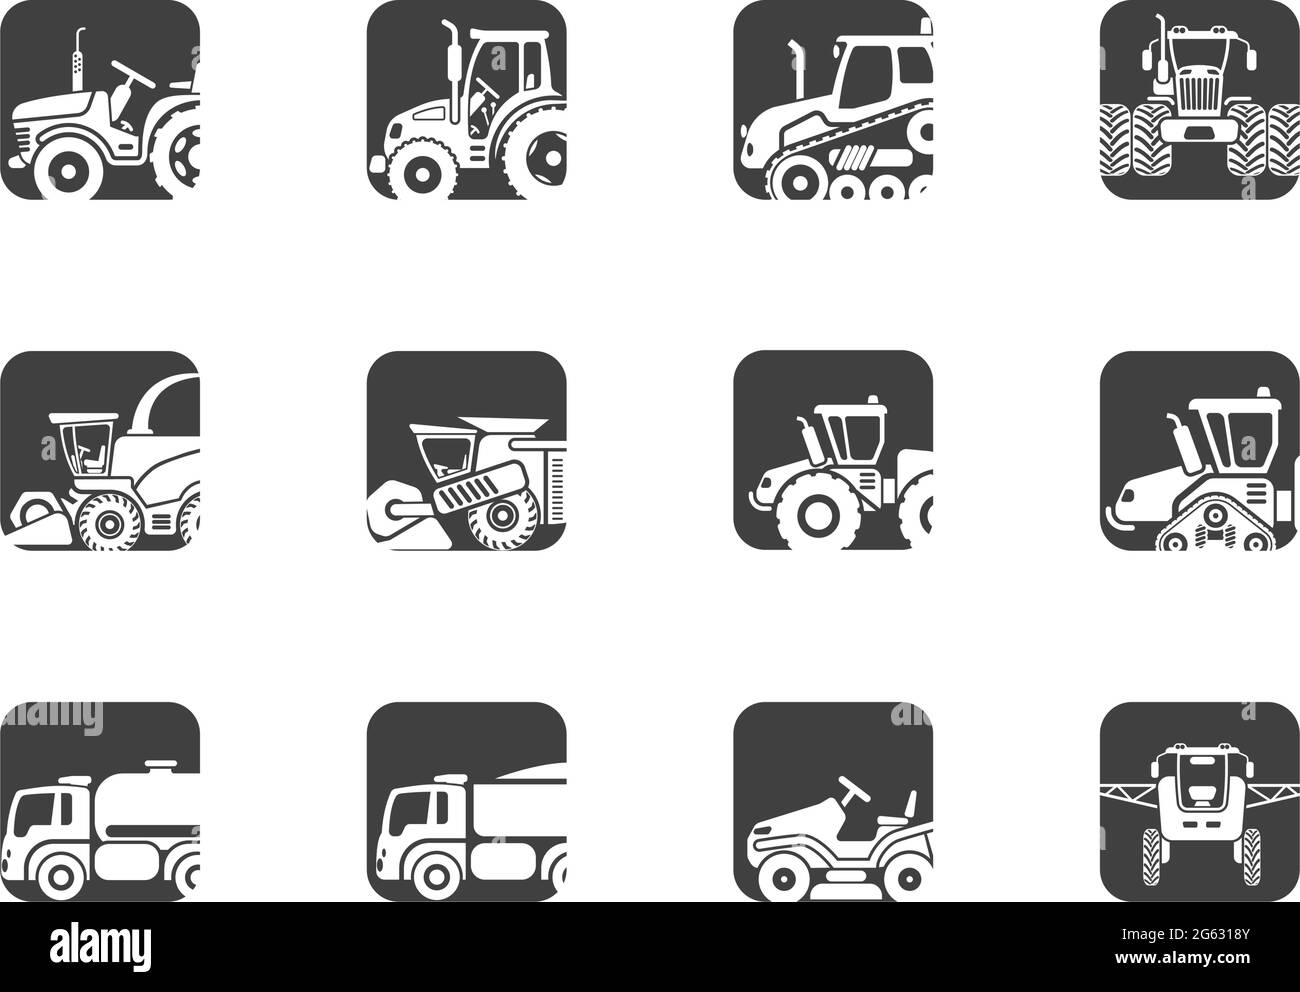 Agricultural vehicles icons set Stock Vector